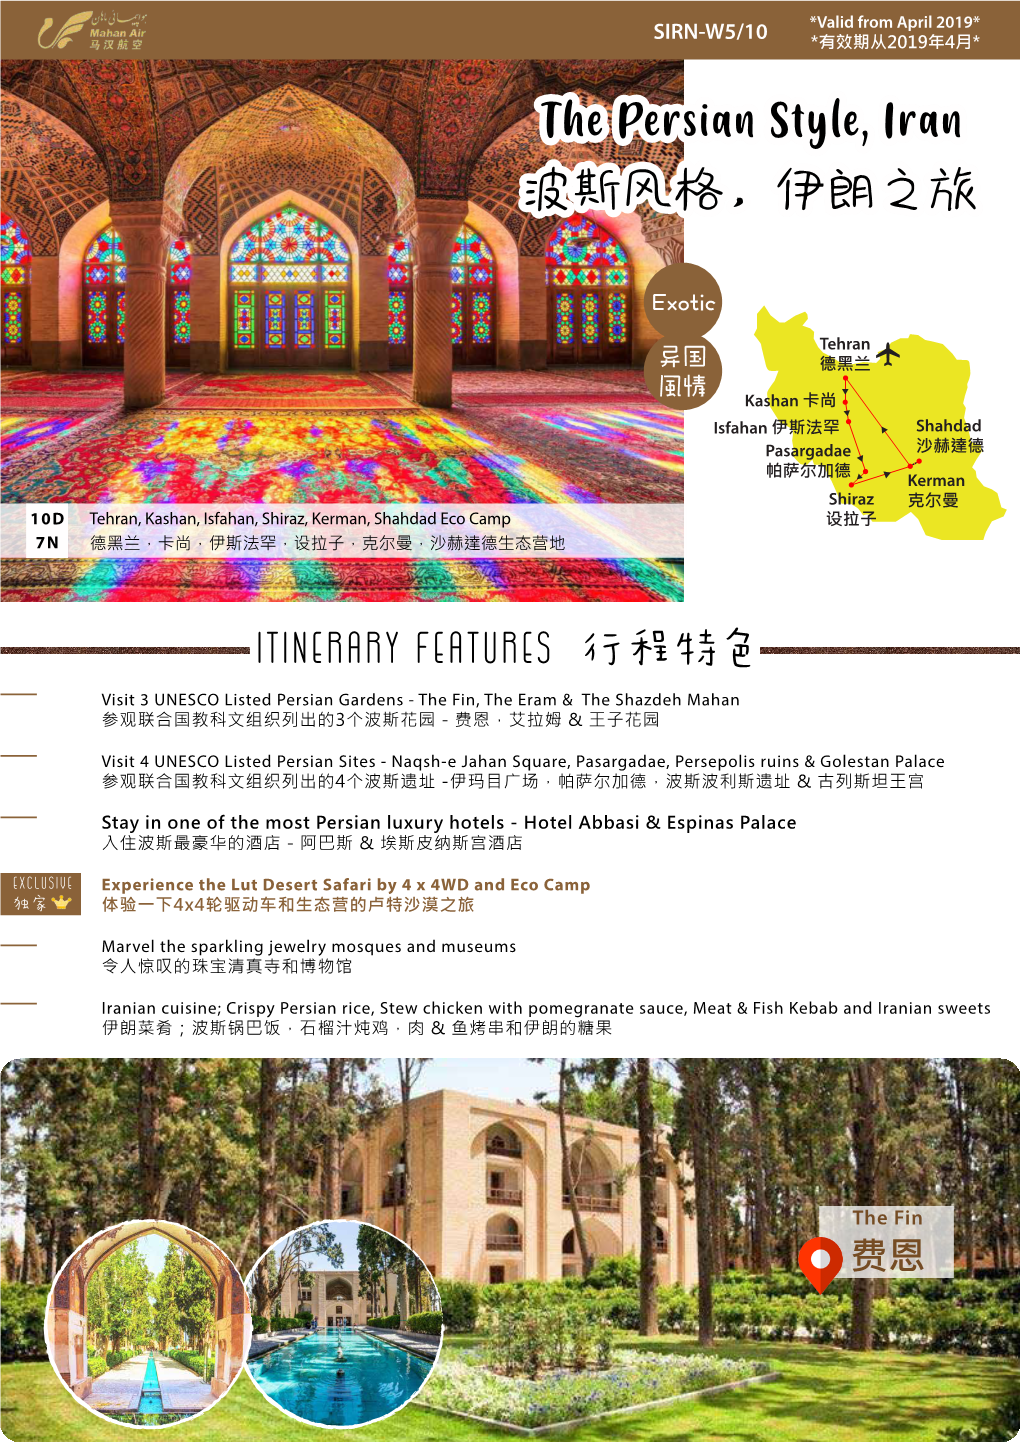 Itinerary Features 行程特色